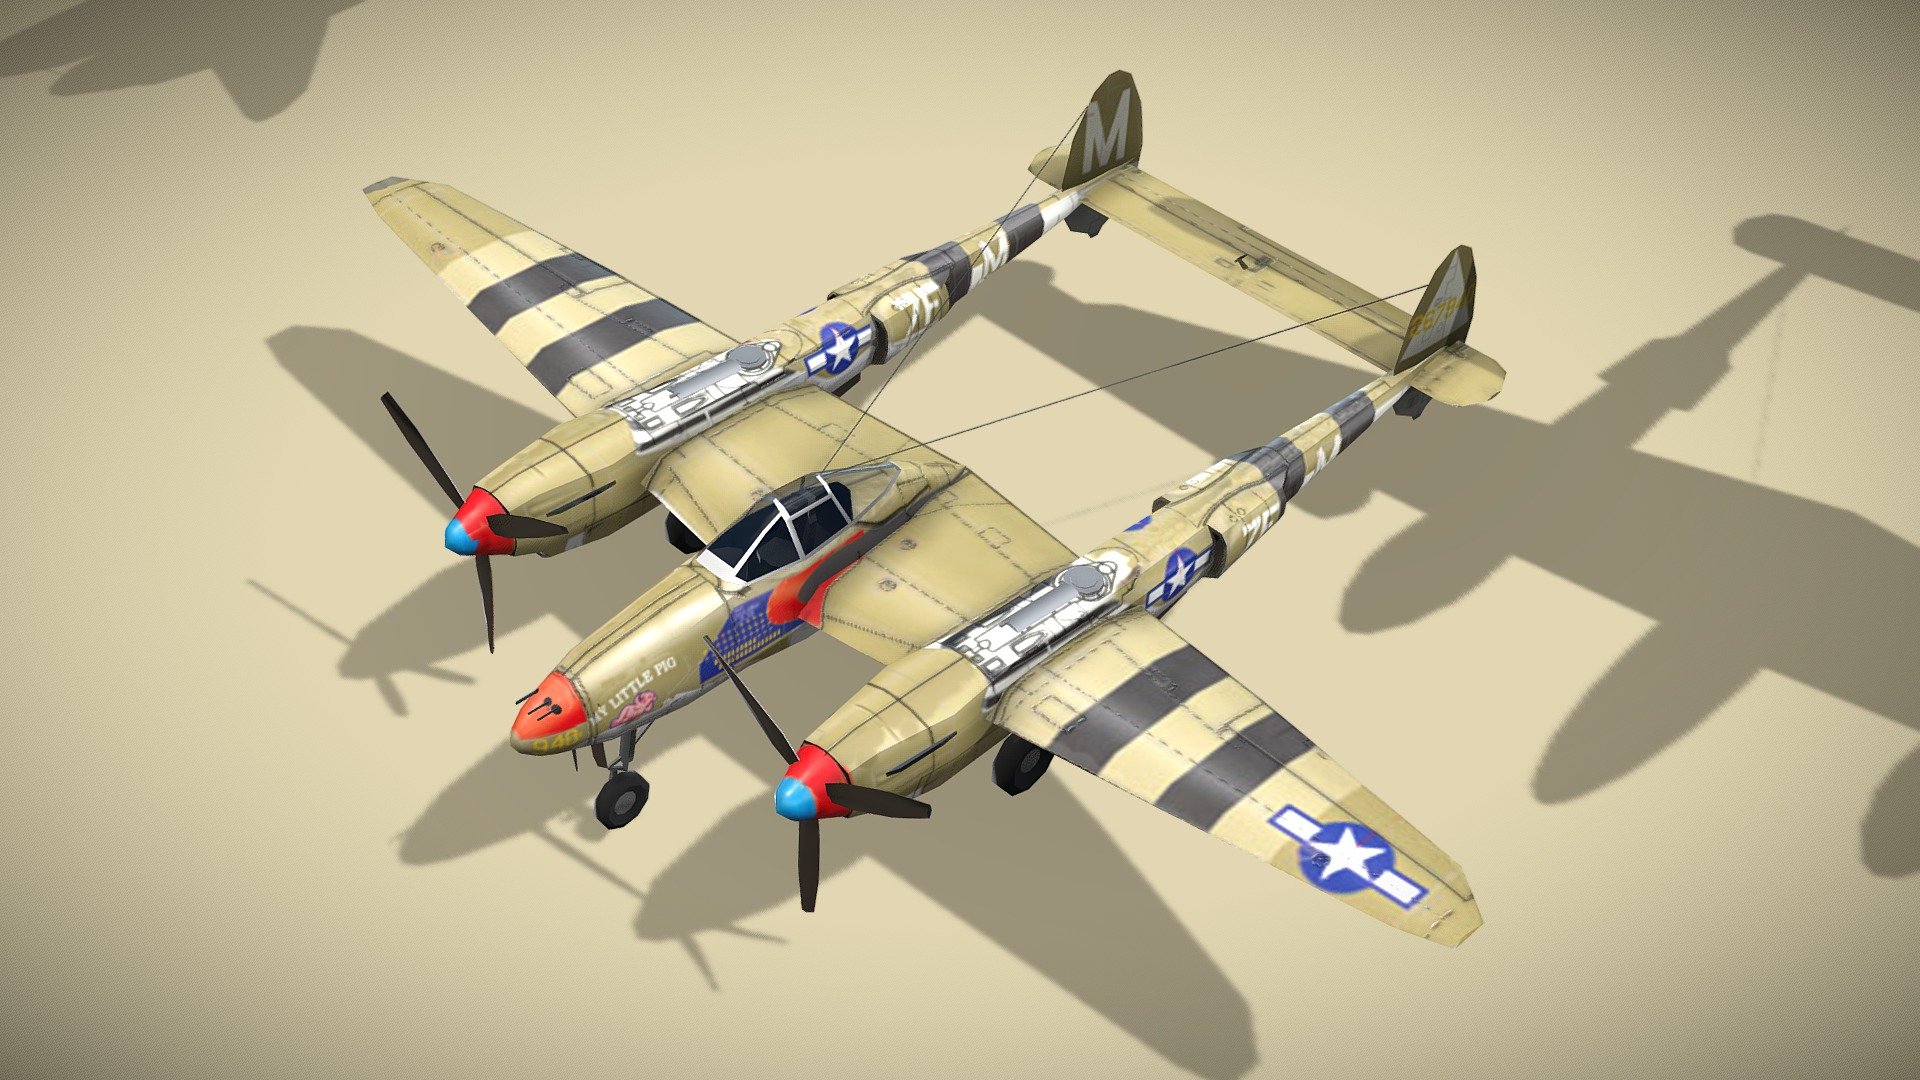 Lockheed P-38 Lightning

Lowpoly model of american fighter plane.



Lockheed P-38 Lightning is an American single-seated, twin piston-engined fighter aircraft that was used during World War II. Developed for the United States Army Air Corps, the P-38 incorporated a distinctive twin-boom design with a central nacelle containing the cockpit and armament. Along with its use as a general fighter, the P-38 was used in various aerial combat roles, including as a highly effective fighter-bomber, a night fighter, and a long-range escort fighter when equipped with drop tanks. Used in the aerial reconnaissance role, the P-38 accounted for 90% of the aerial film captured over Europe.



1 standing version with wheels and 2 flying versions with trails, afterburner, pilot and armament.

Model has bump map, roughness map and 3 x diffuse textures.



Check also my other aircrafts and cars.

Patreon with monthly free model - Lockheed P-38 Lightning - Buy Royalty Free 3D model by NETRUNNER_pl 3d model